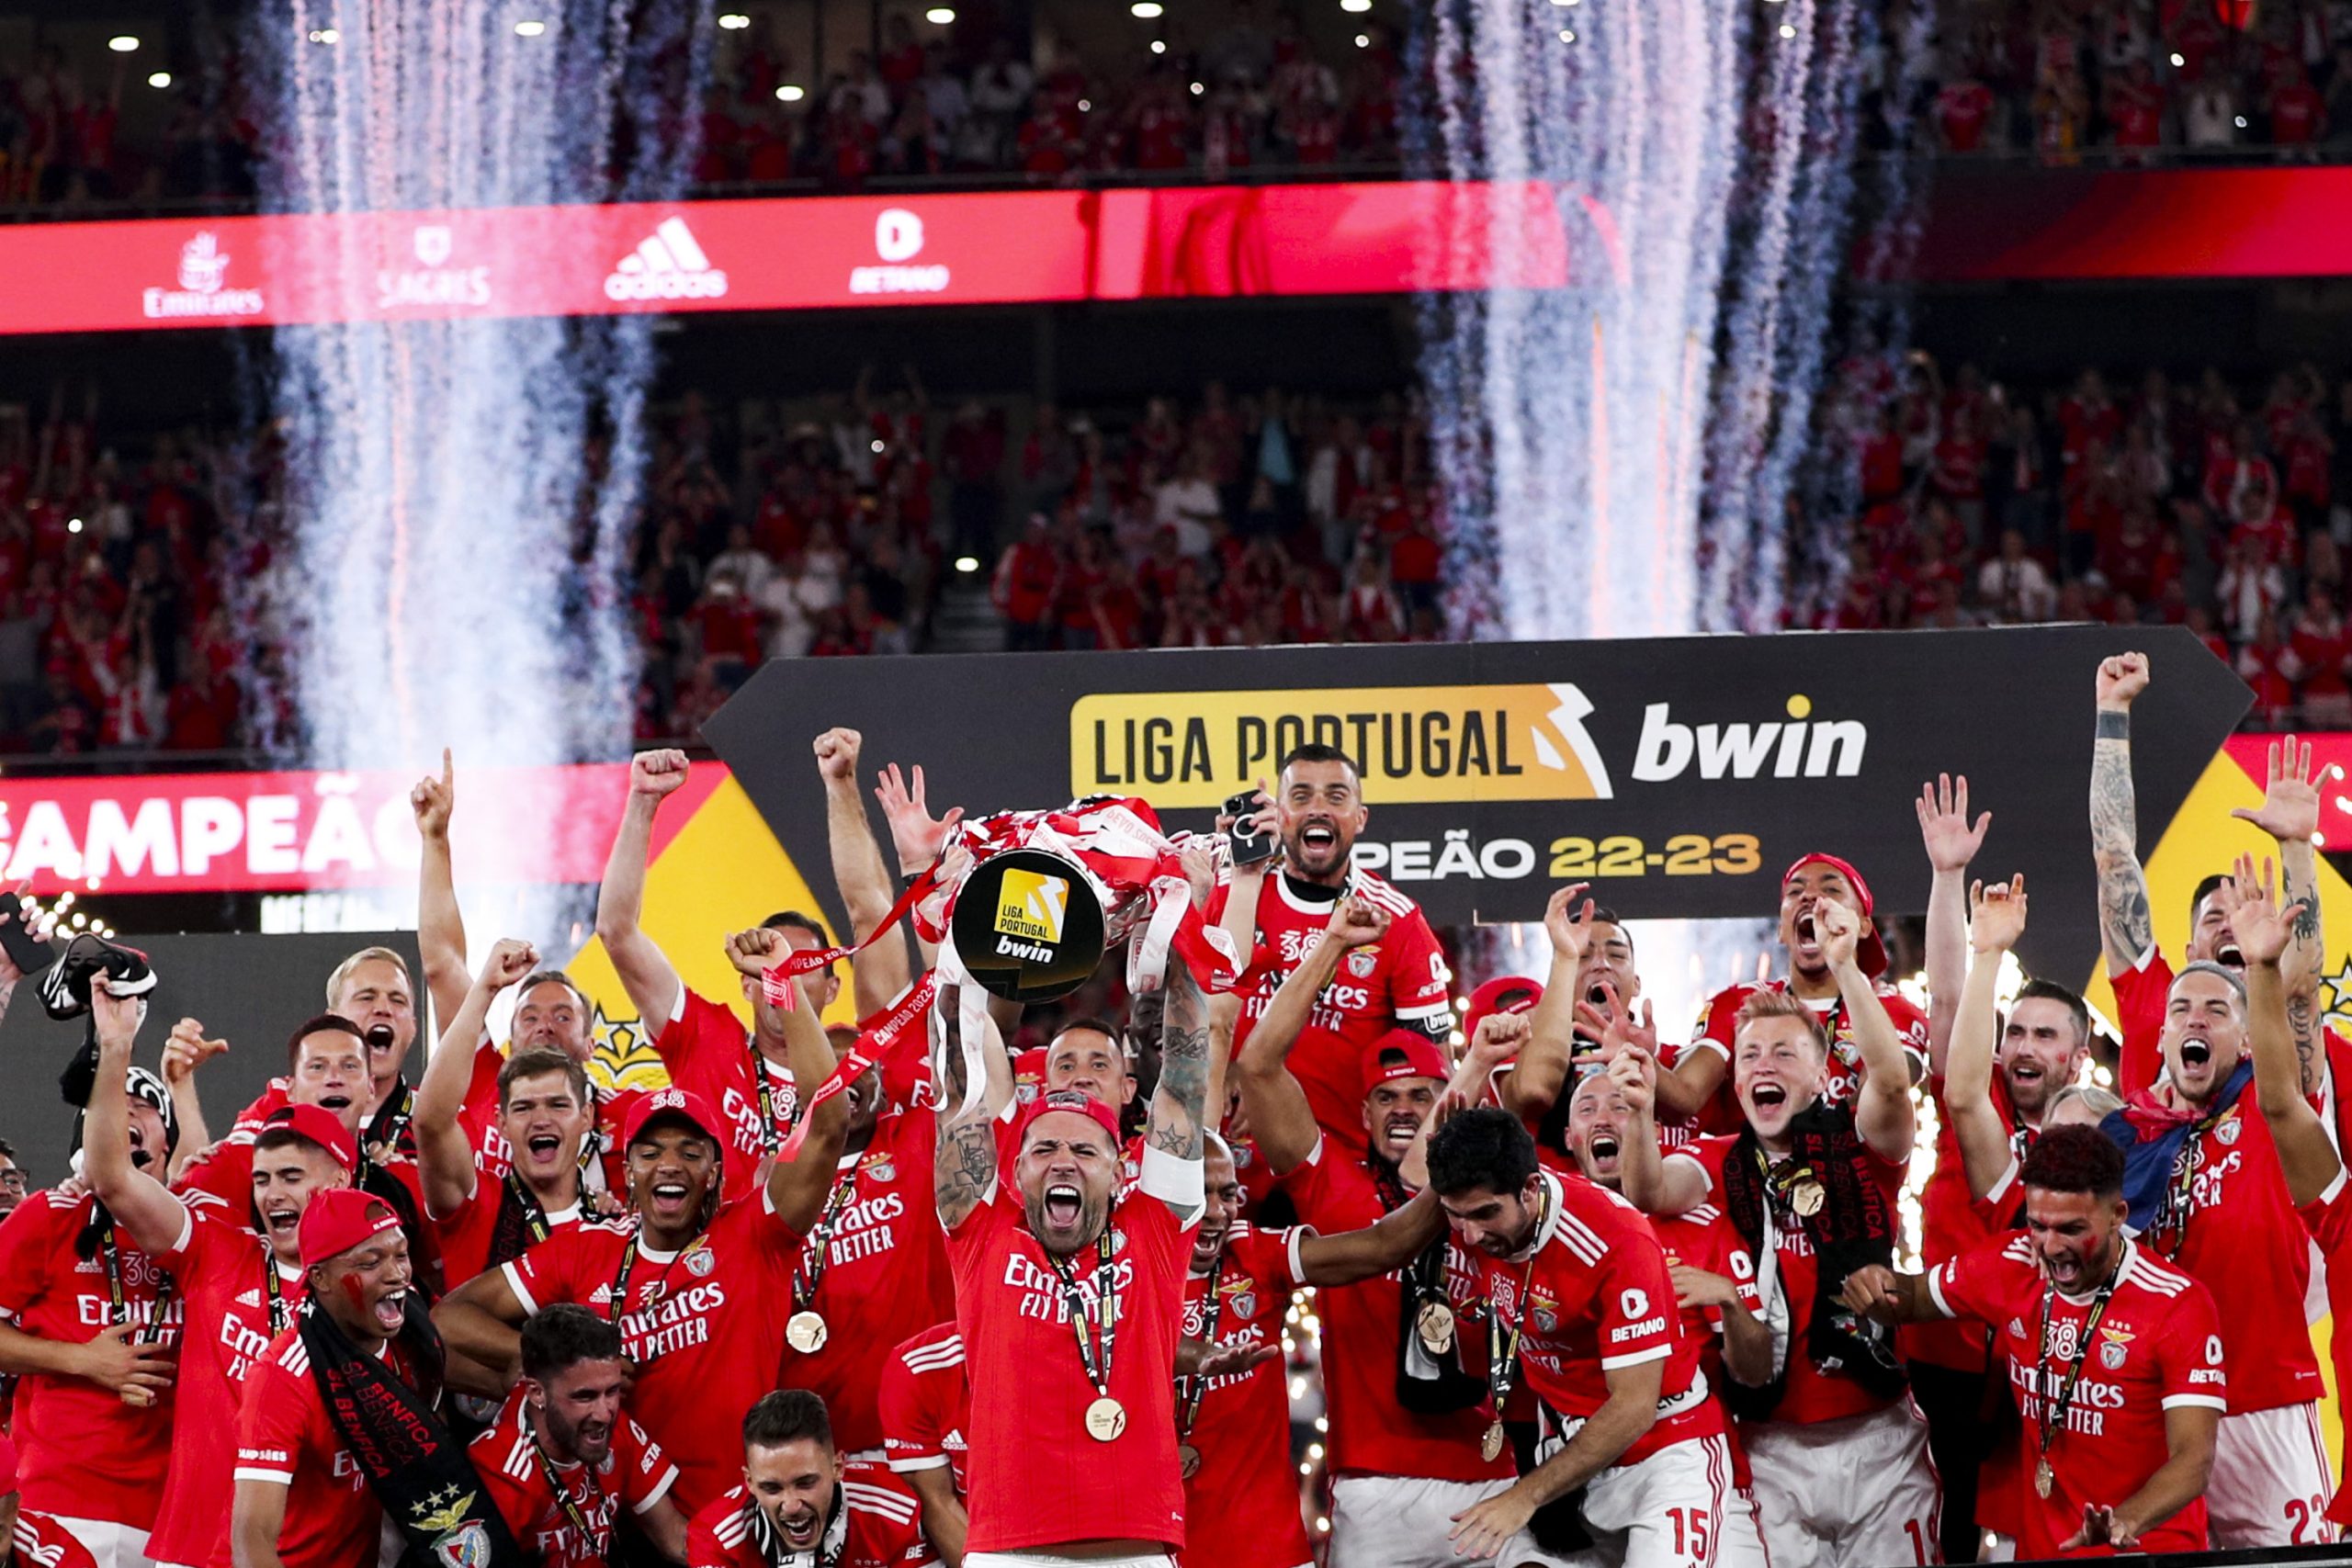 Benfica defeated Santa Clara to clinch the Portuguese title after four years of waiting